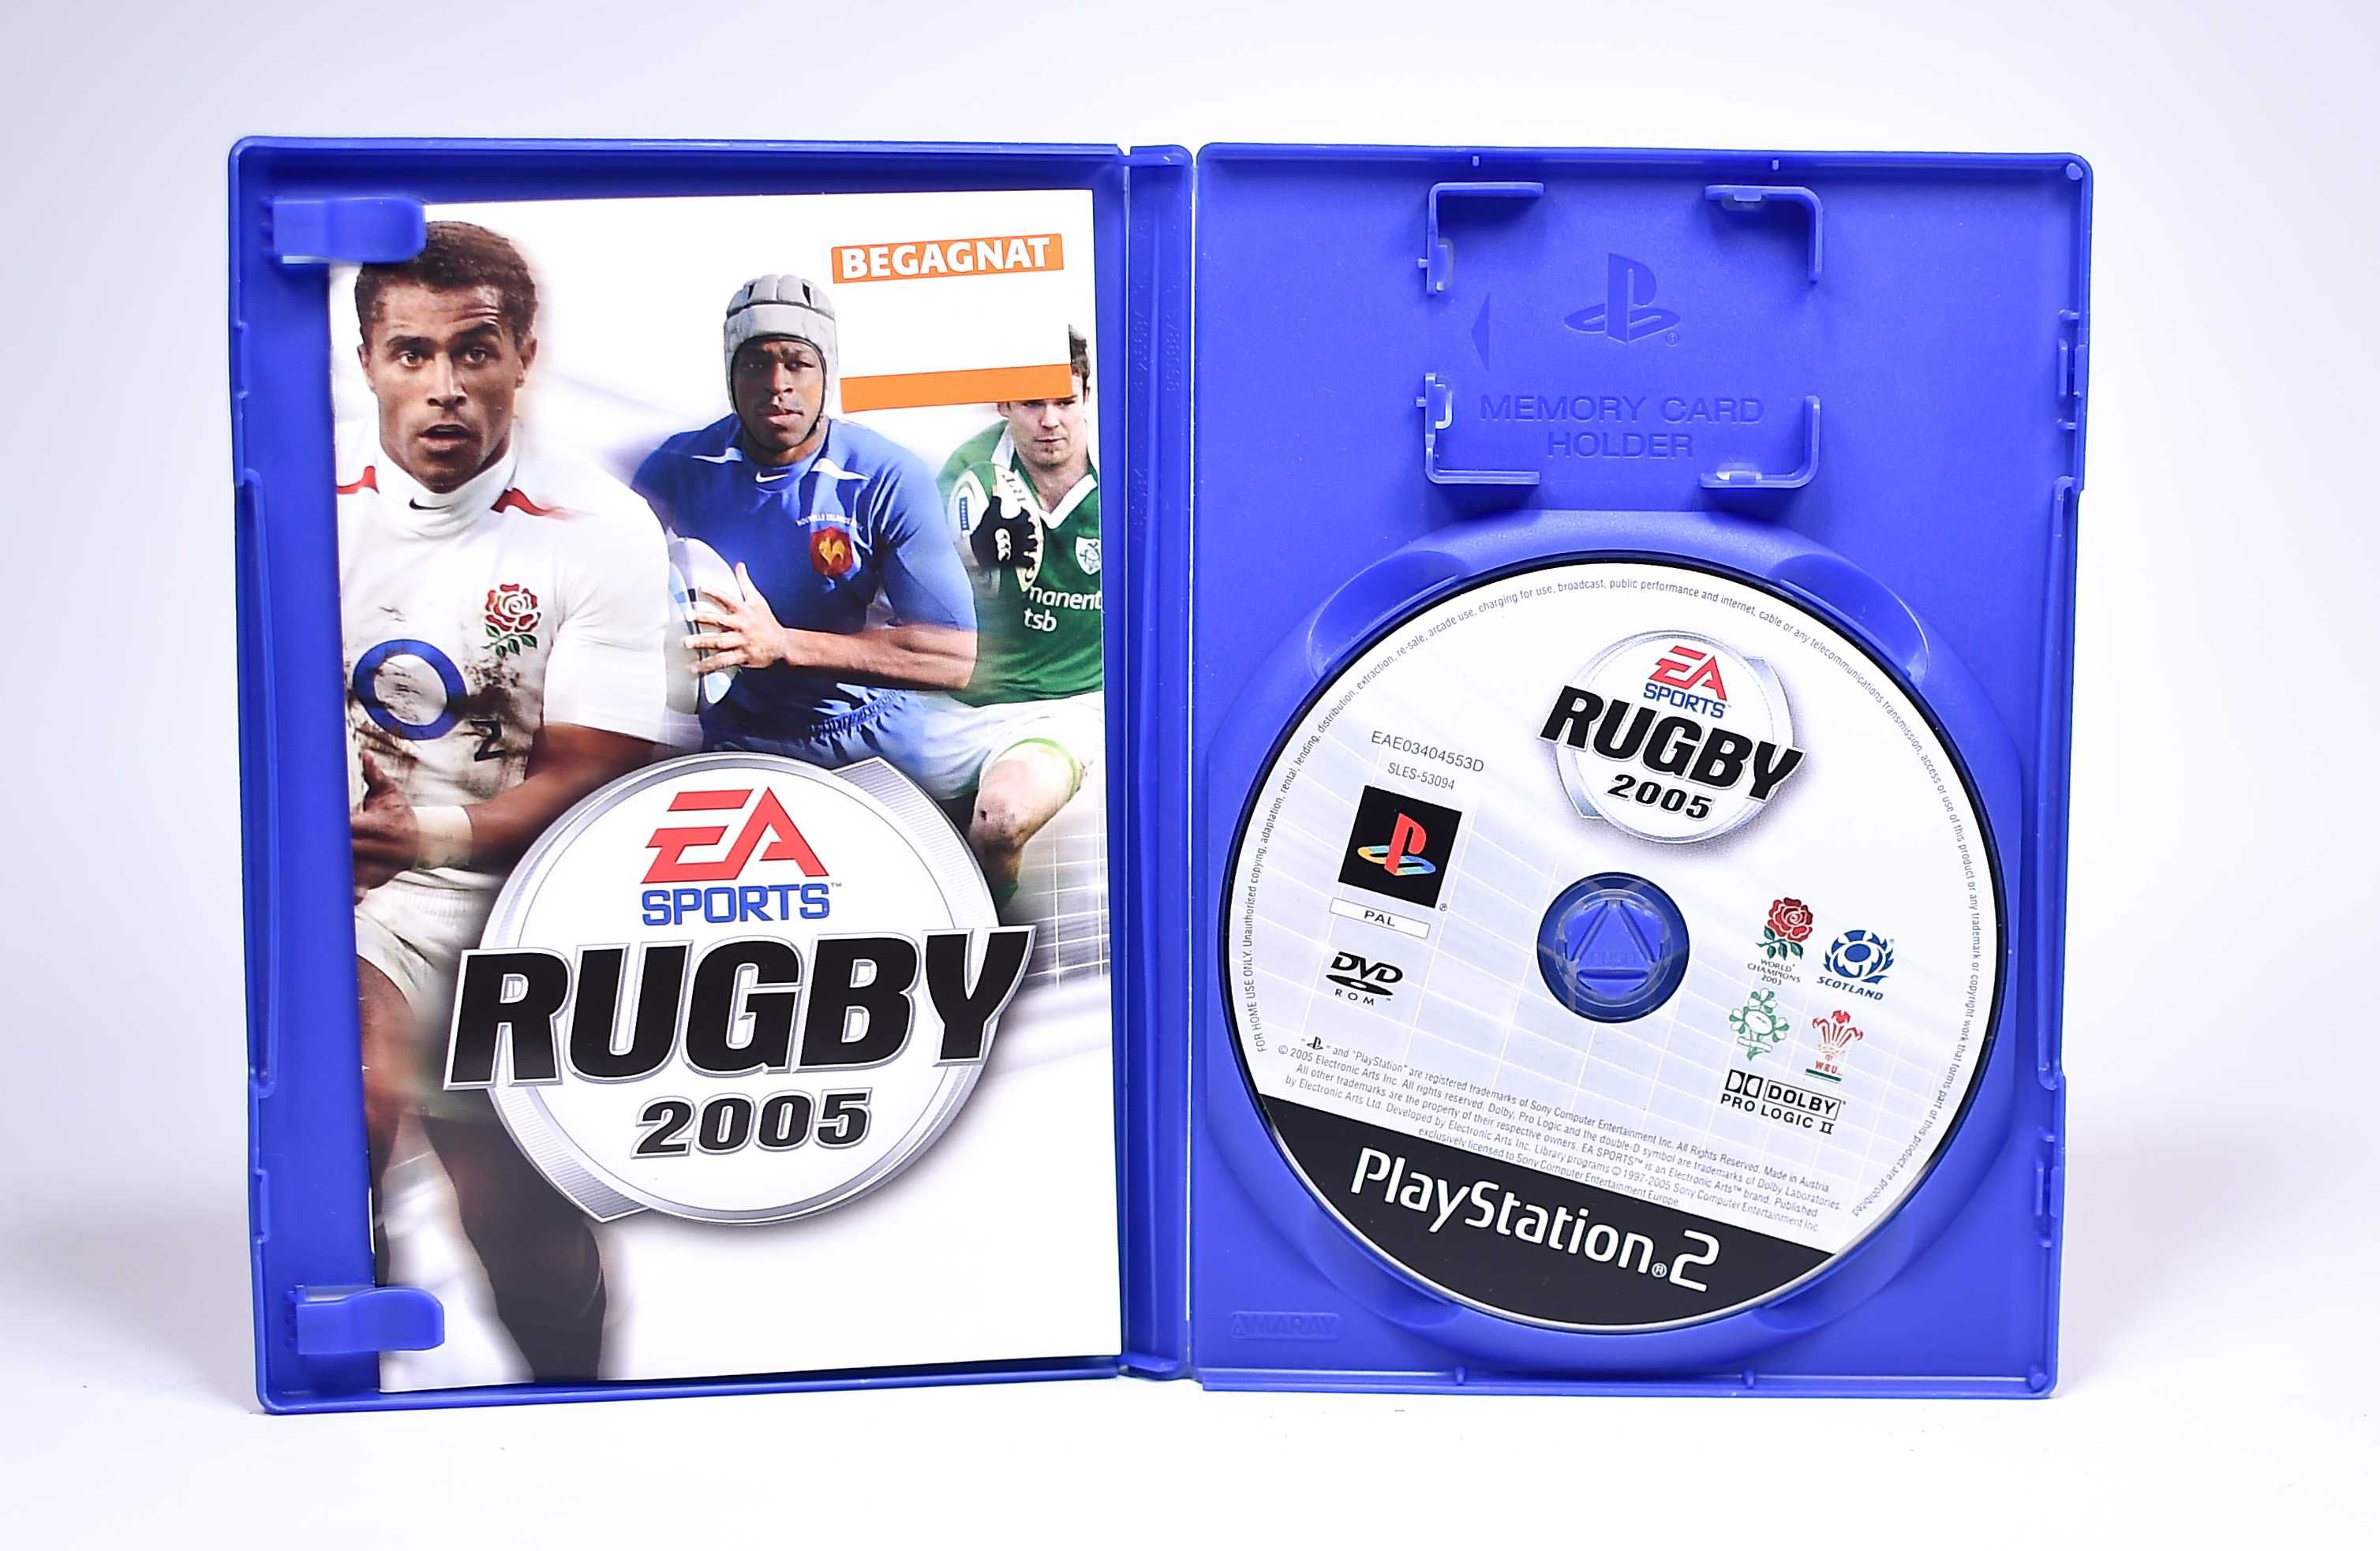 PS2 # EA Sports Rugby 2005